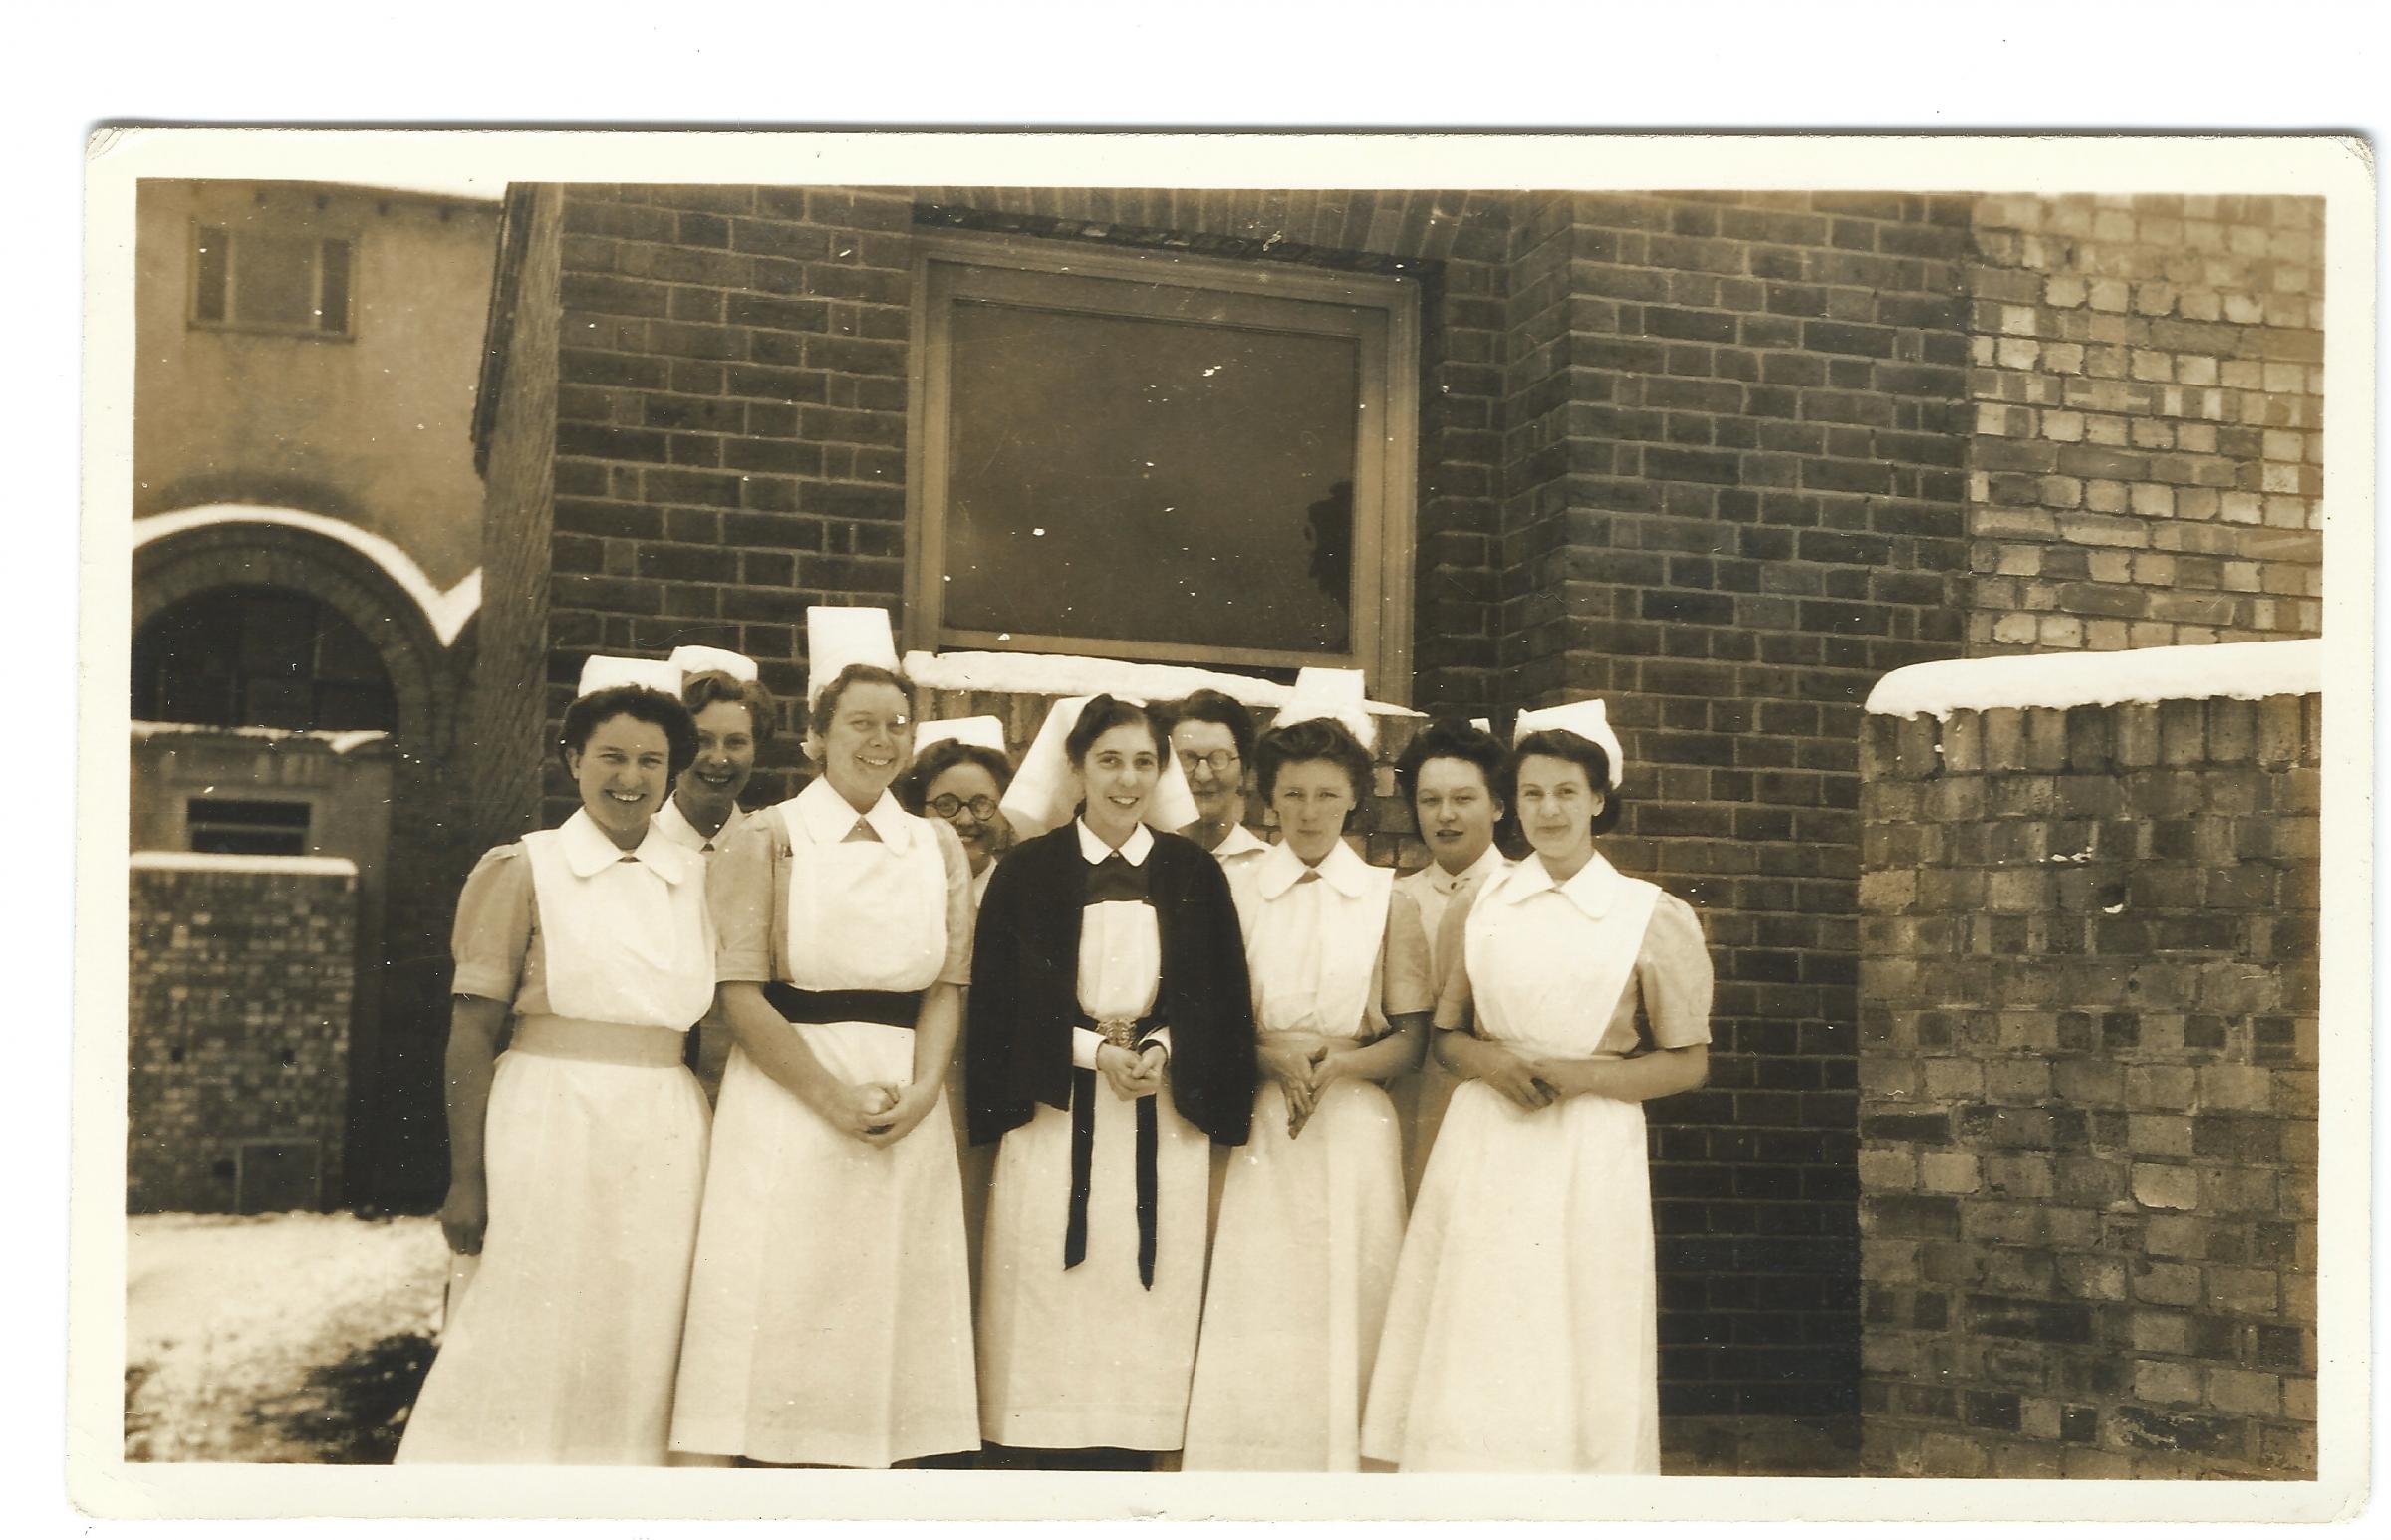 Pace Memorial Hospital nurses in the 1950s